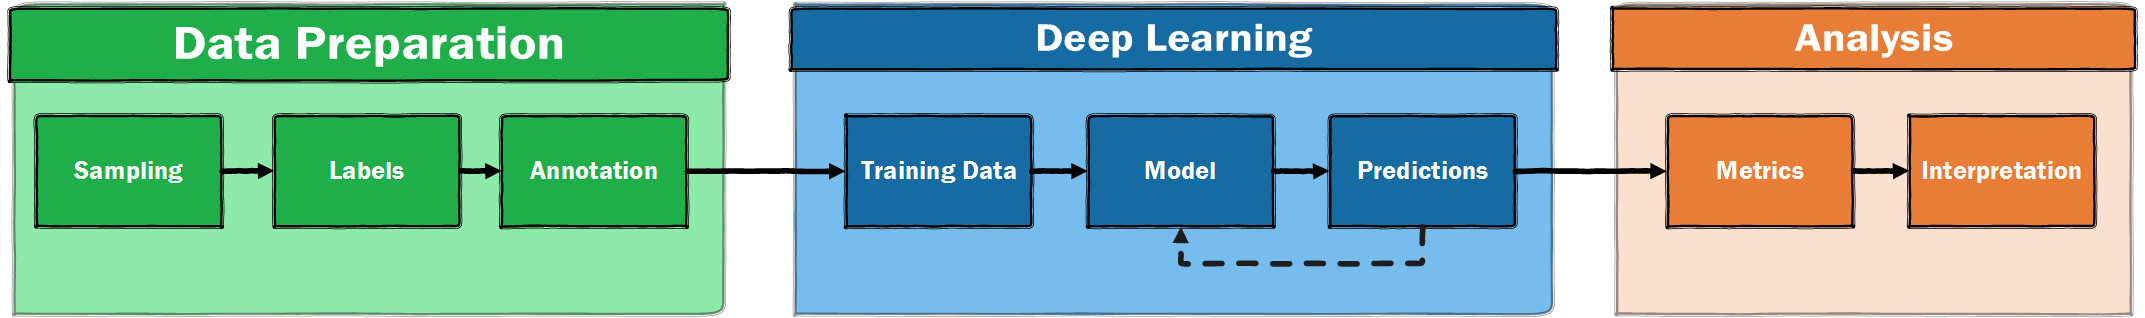 A diagram showing a workflow of a machine learning pipeline. The pipeline contains three boxes, 'data preparation', 'deep learning' and 'analysis'. An arrow moves across these three boxes. Within the 'data preparation' box are three boxes from left to right: 'sampling', 'labels', 'annotation'. For the box 'deep learning' there are three smaller boxes with arrows moving between them: 'training data', 'model', 'predictions'. The box 'analysis' contains three smaller boxes 'metrics' and 'interpretation'.